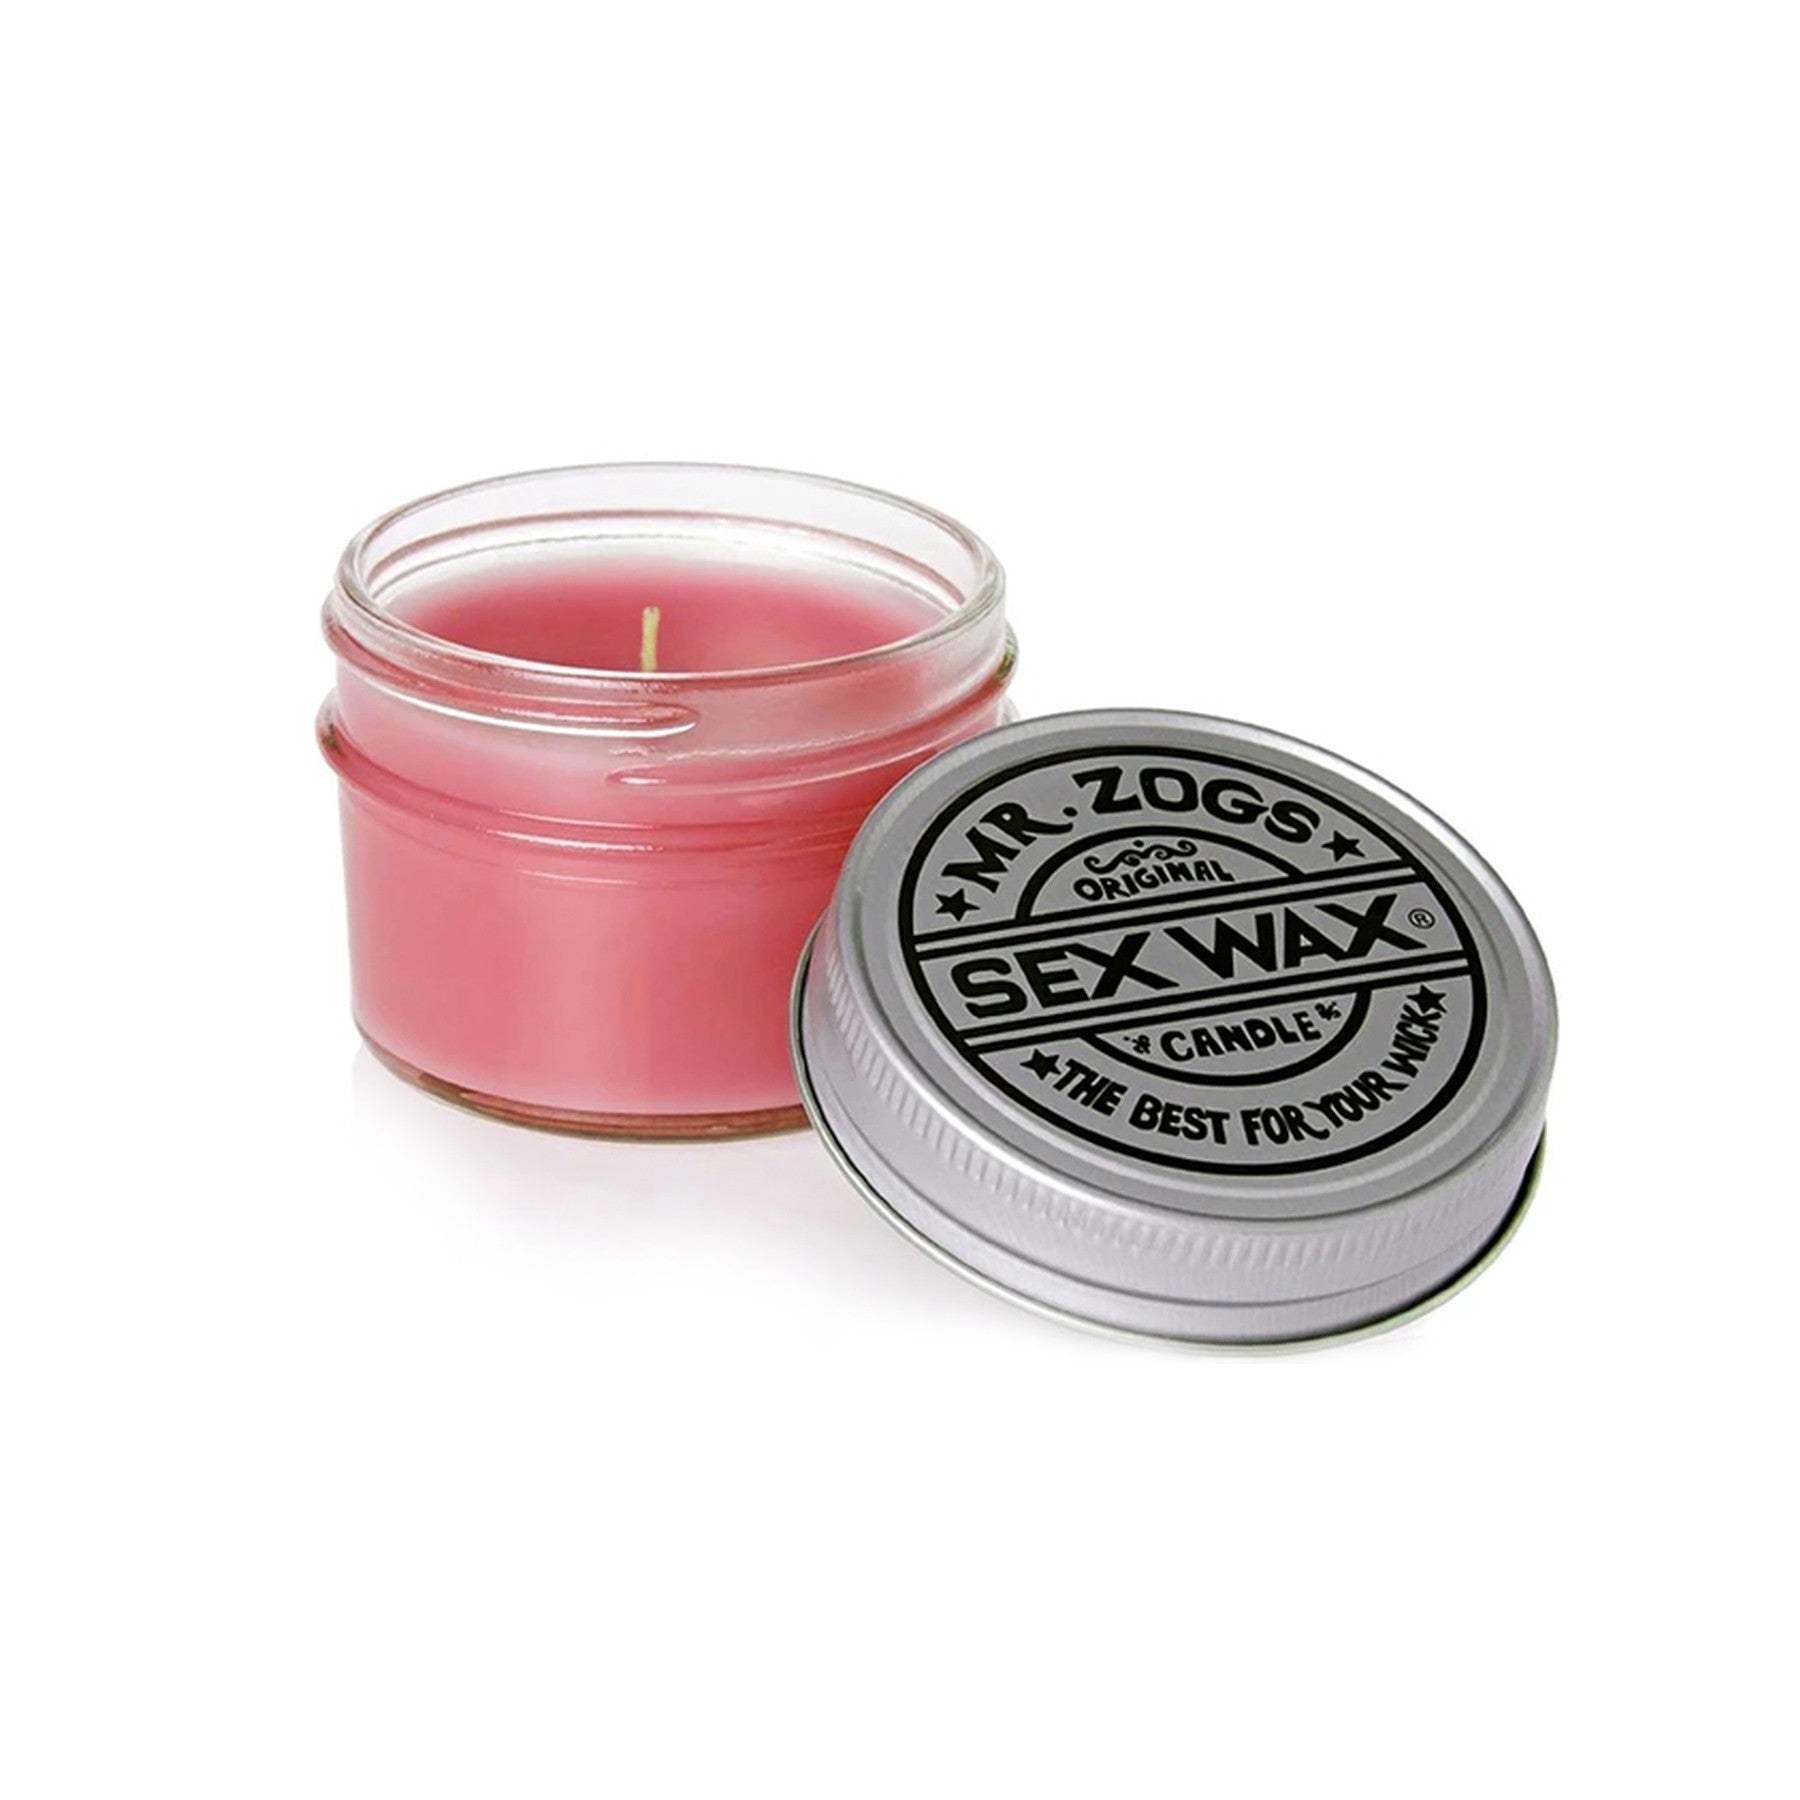 SEX WAX - Strawberry scented candle